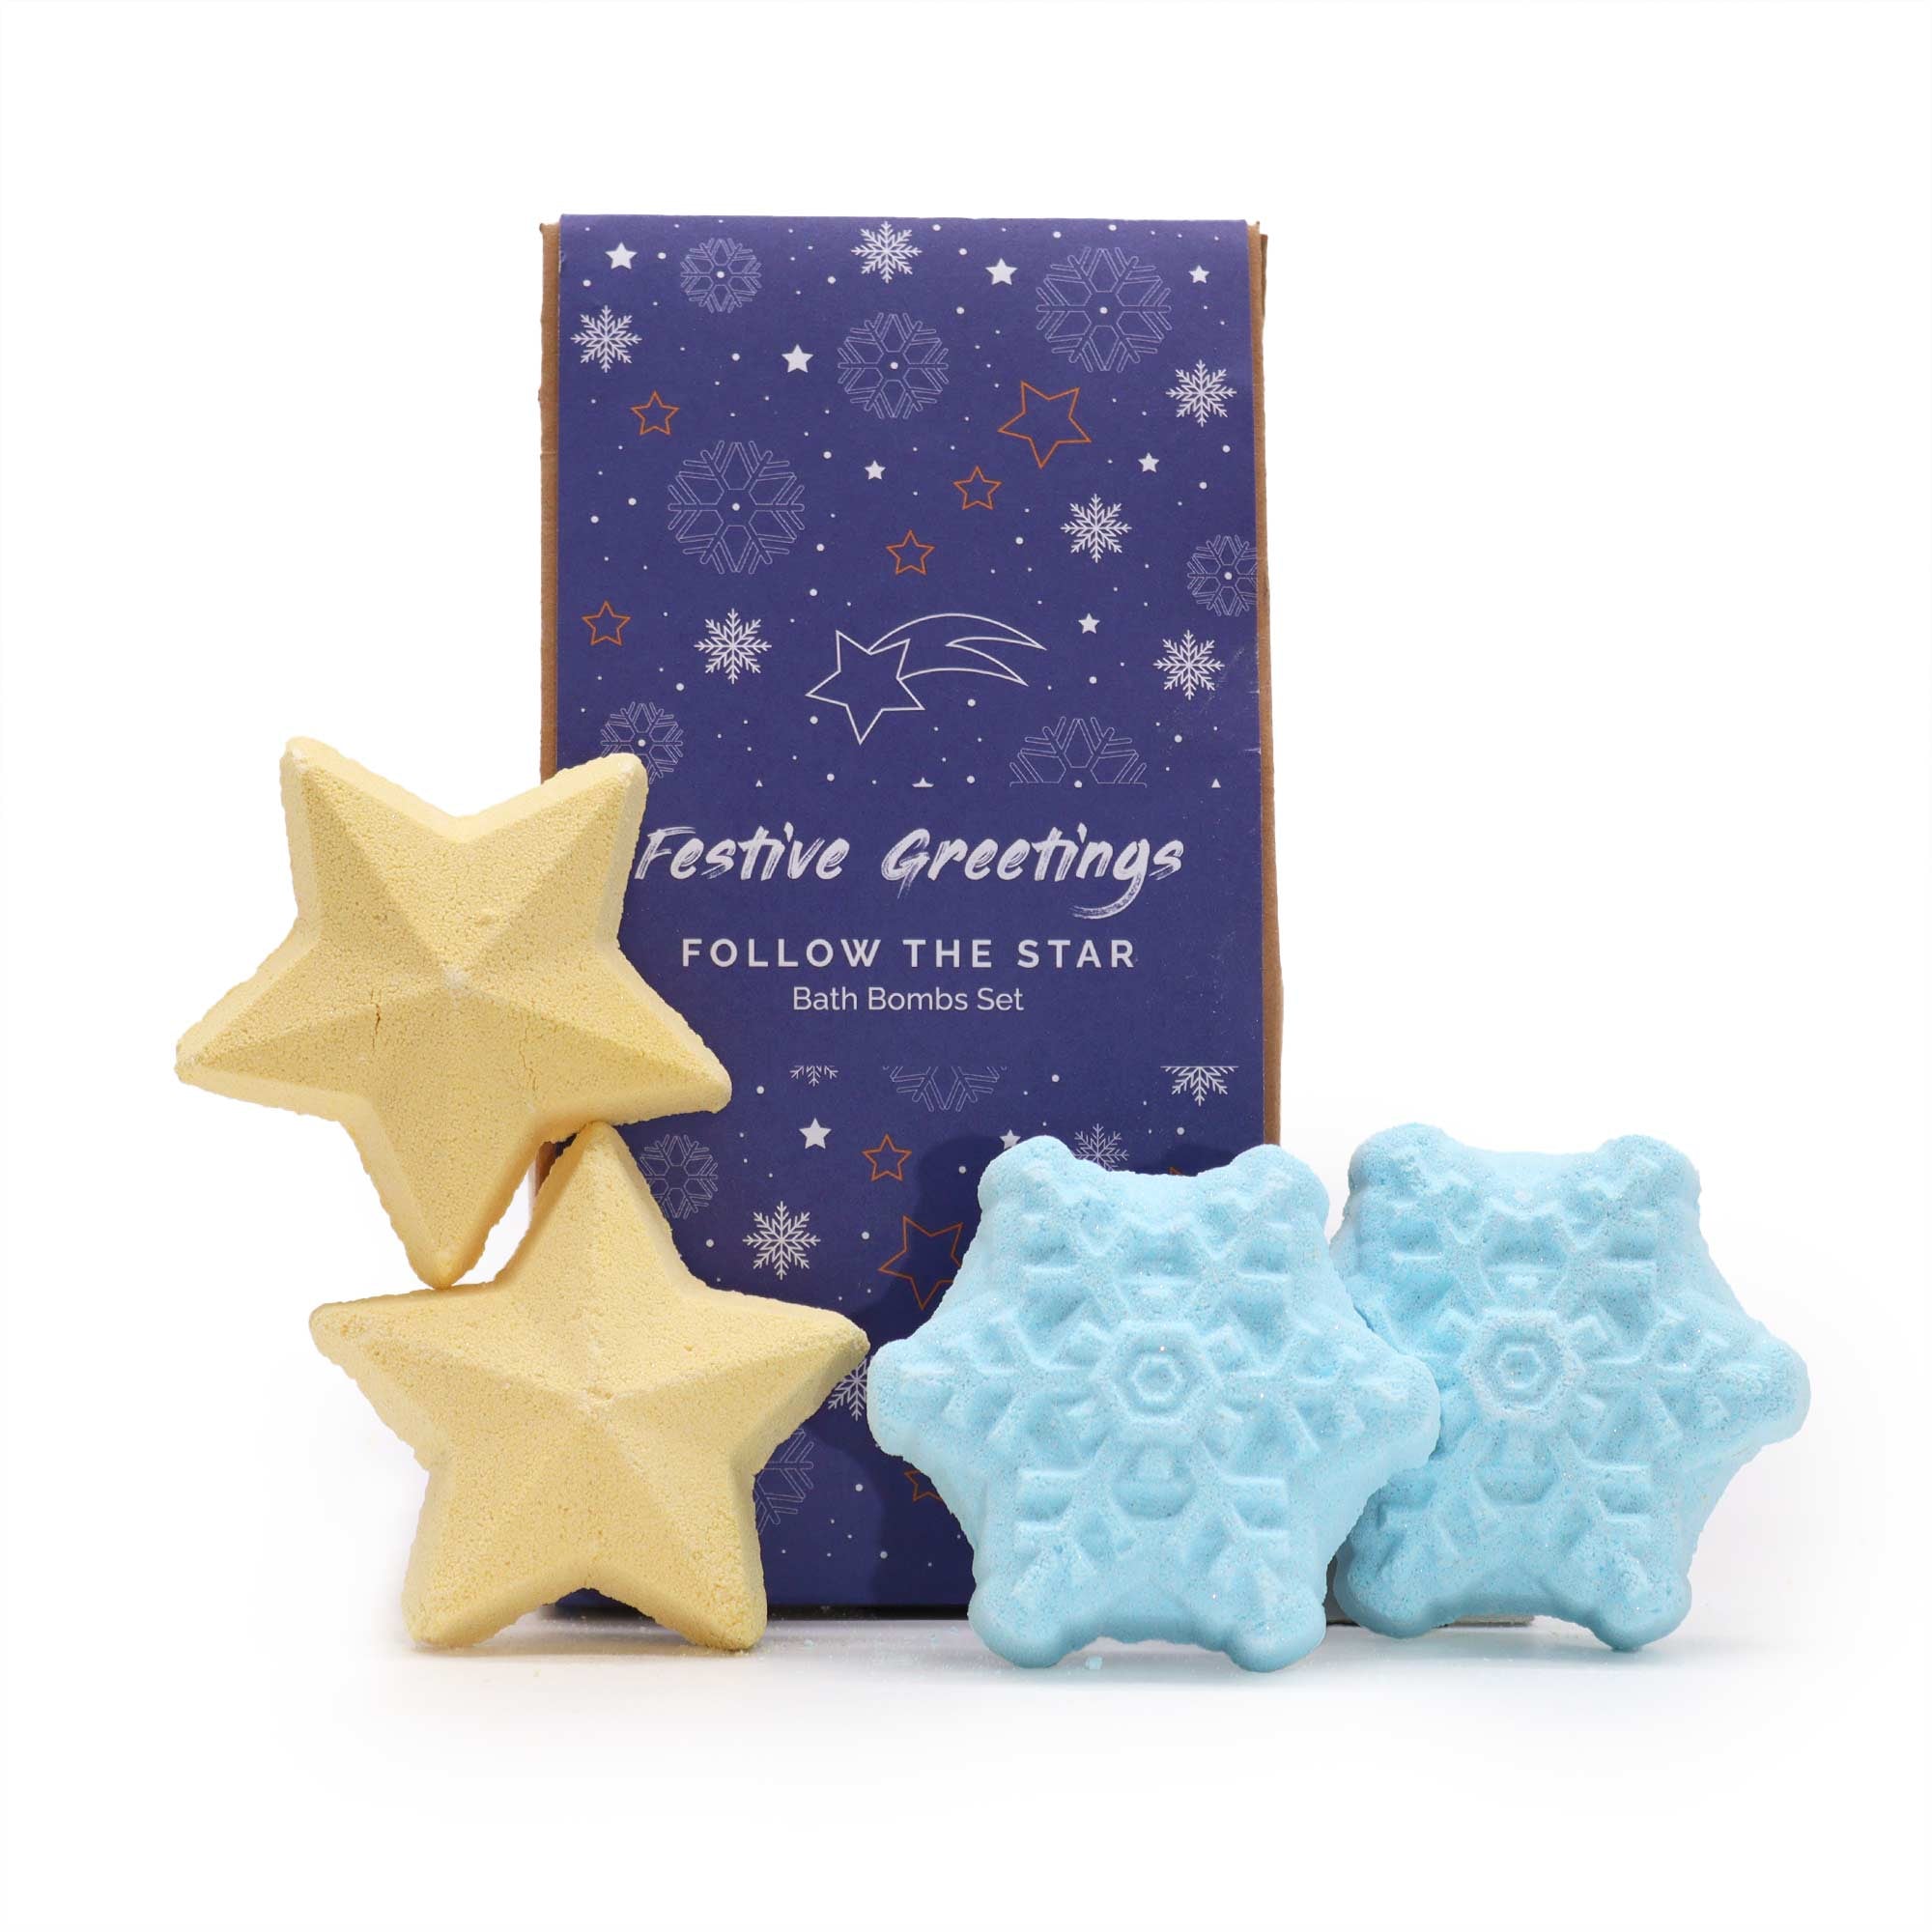 View Follow the Star Christmas Bath Bomb Gift Pack information